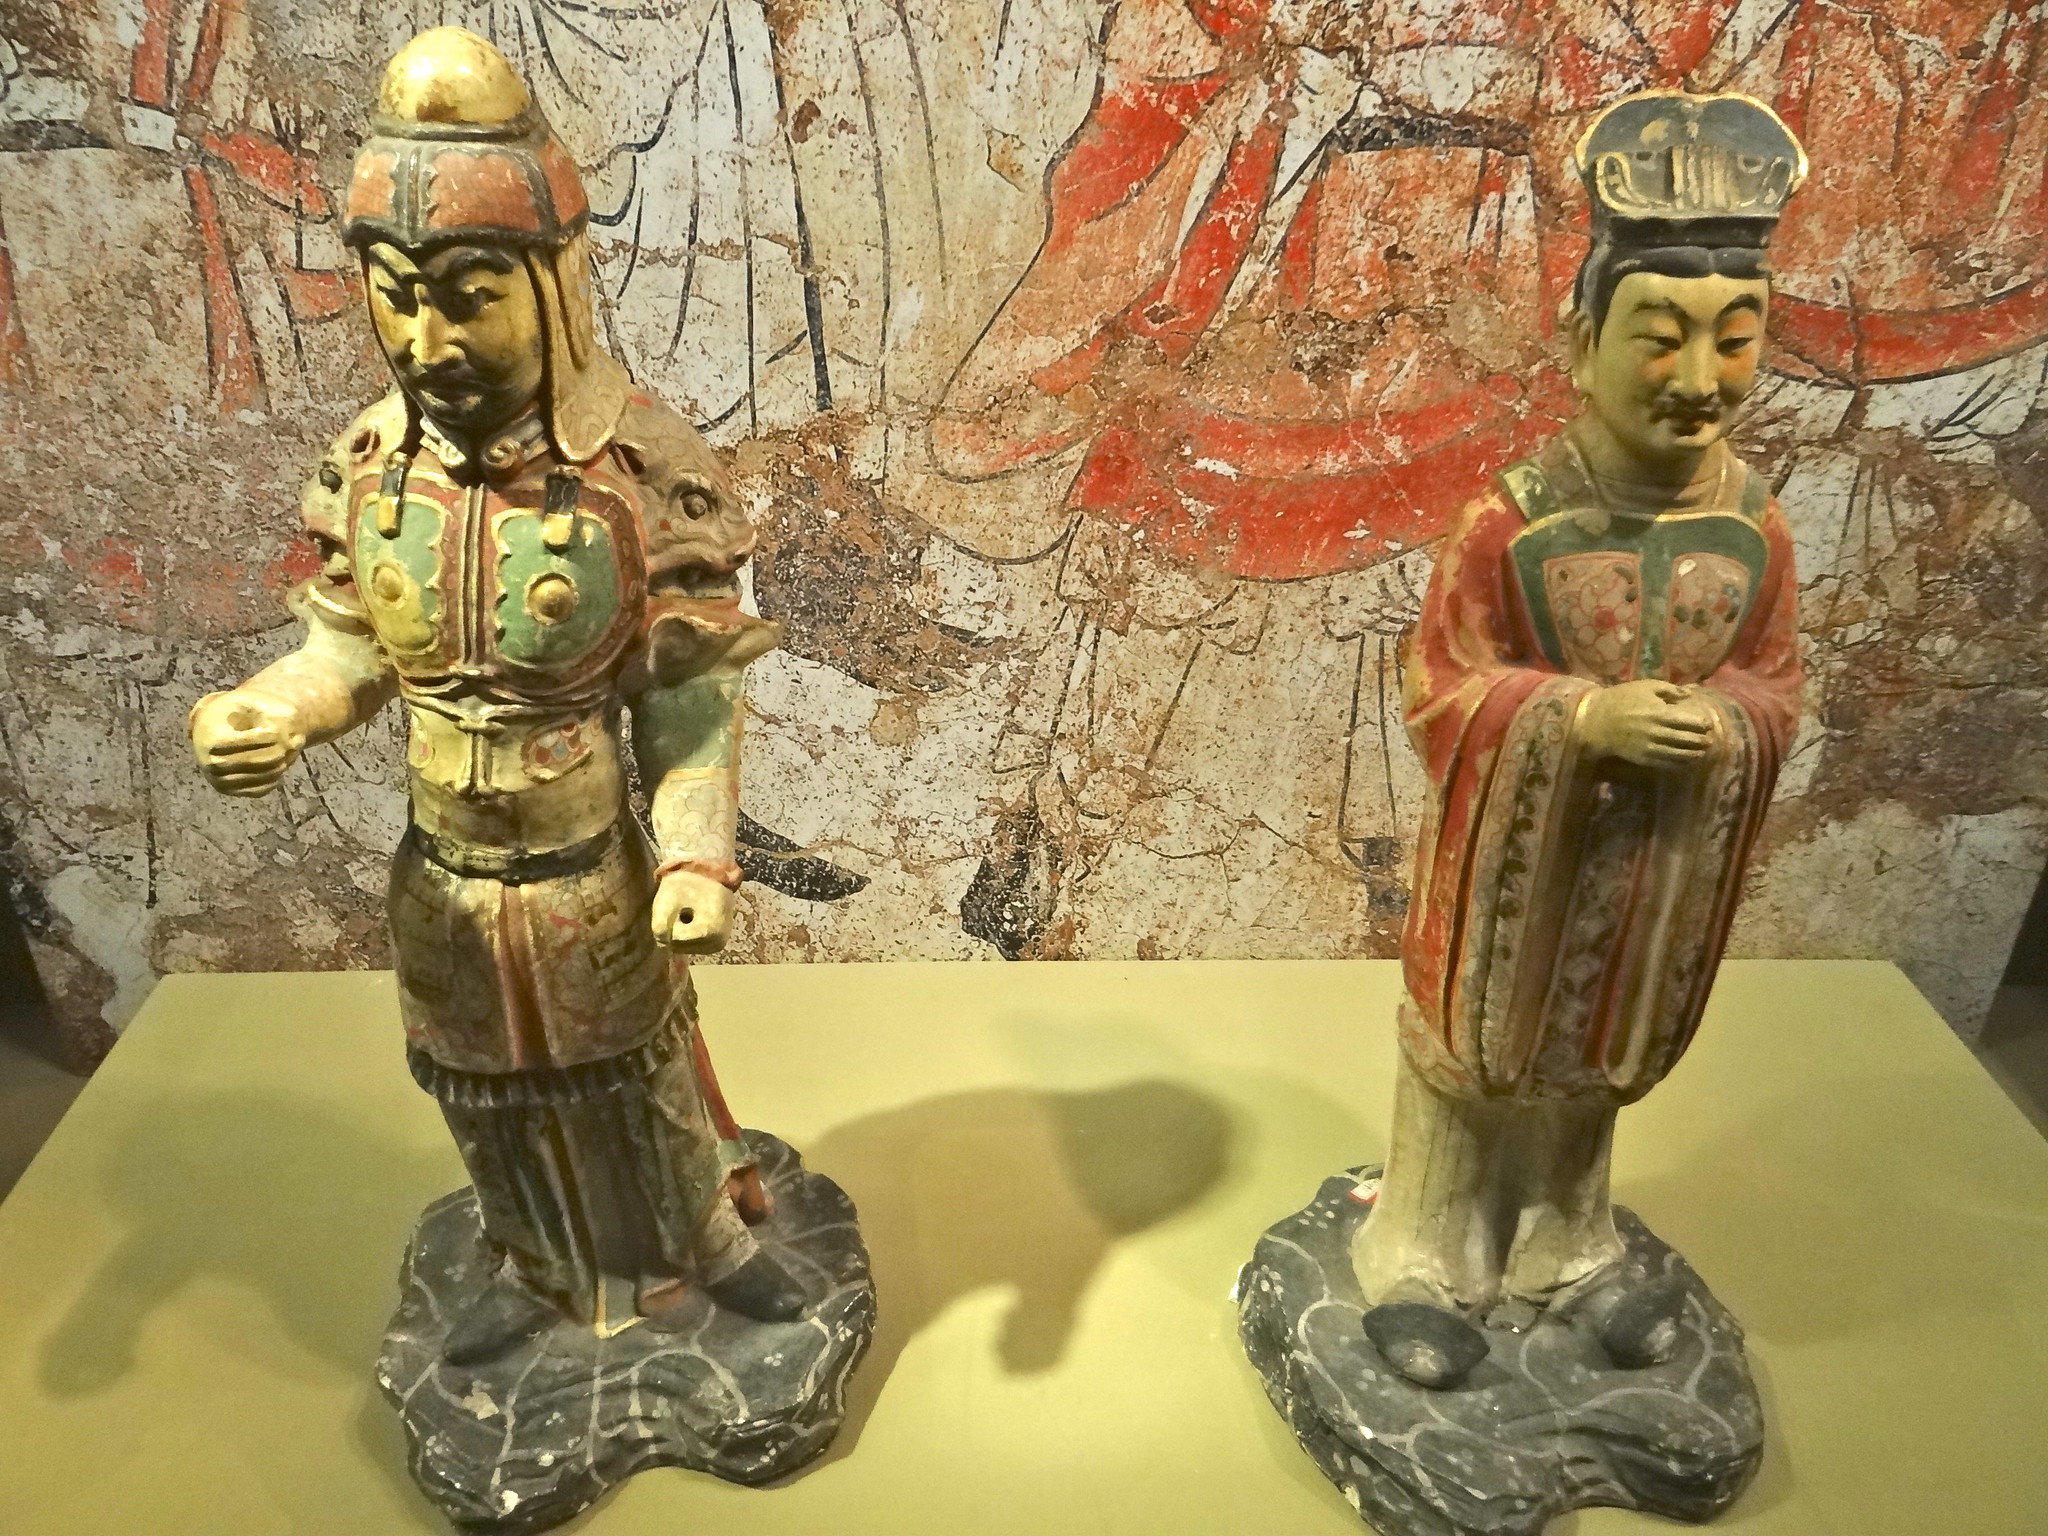 Chinese Figures @ Shaanxi Museum